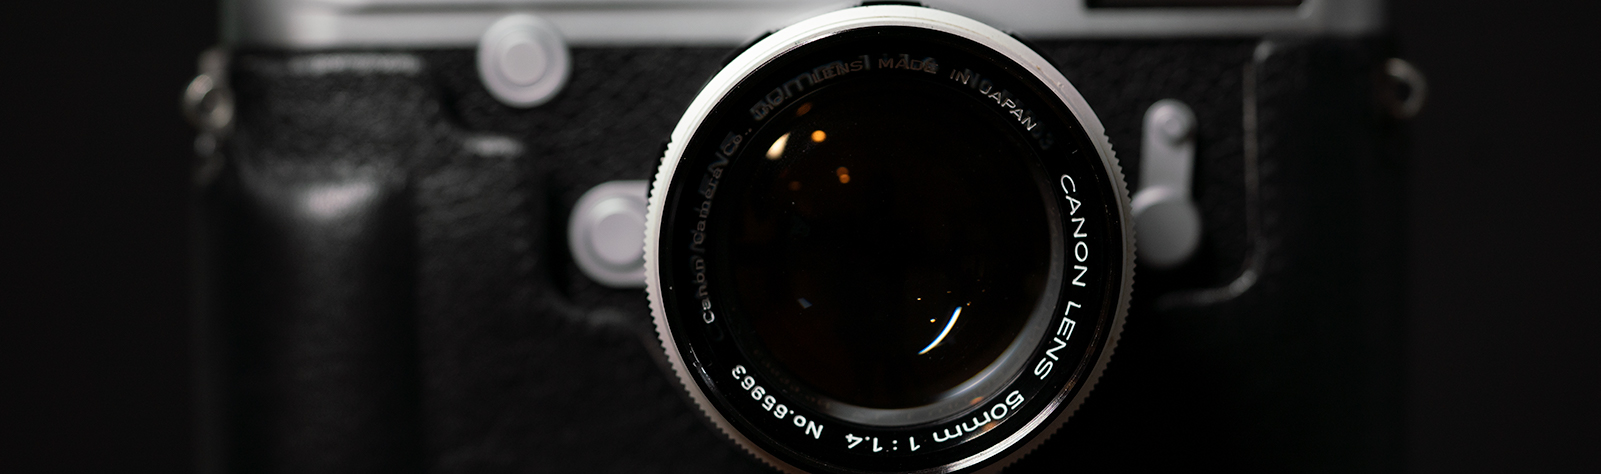 Canon 50mm f/1.4 LTM, “Japanese Summilux,” Review